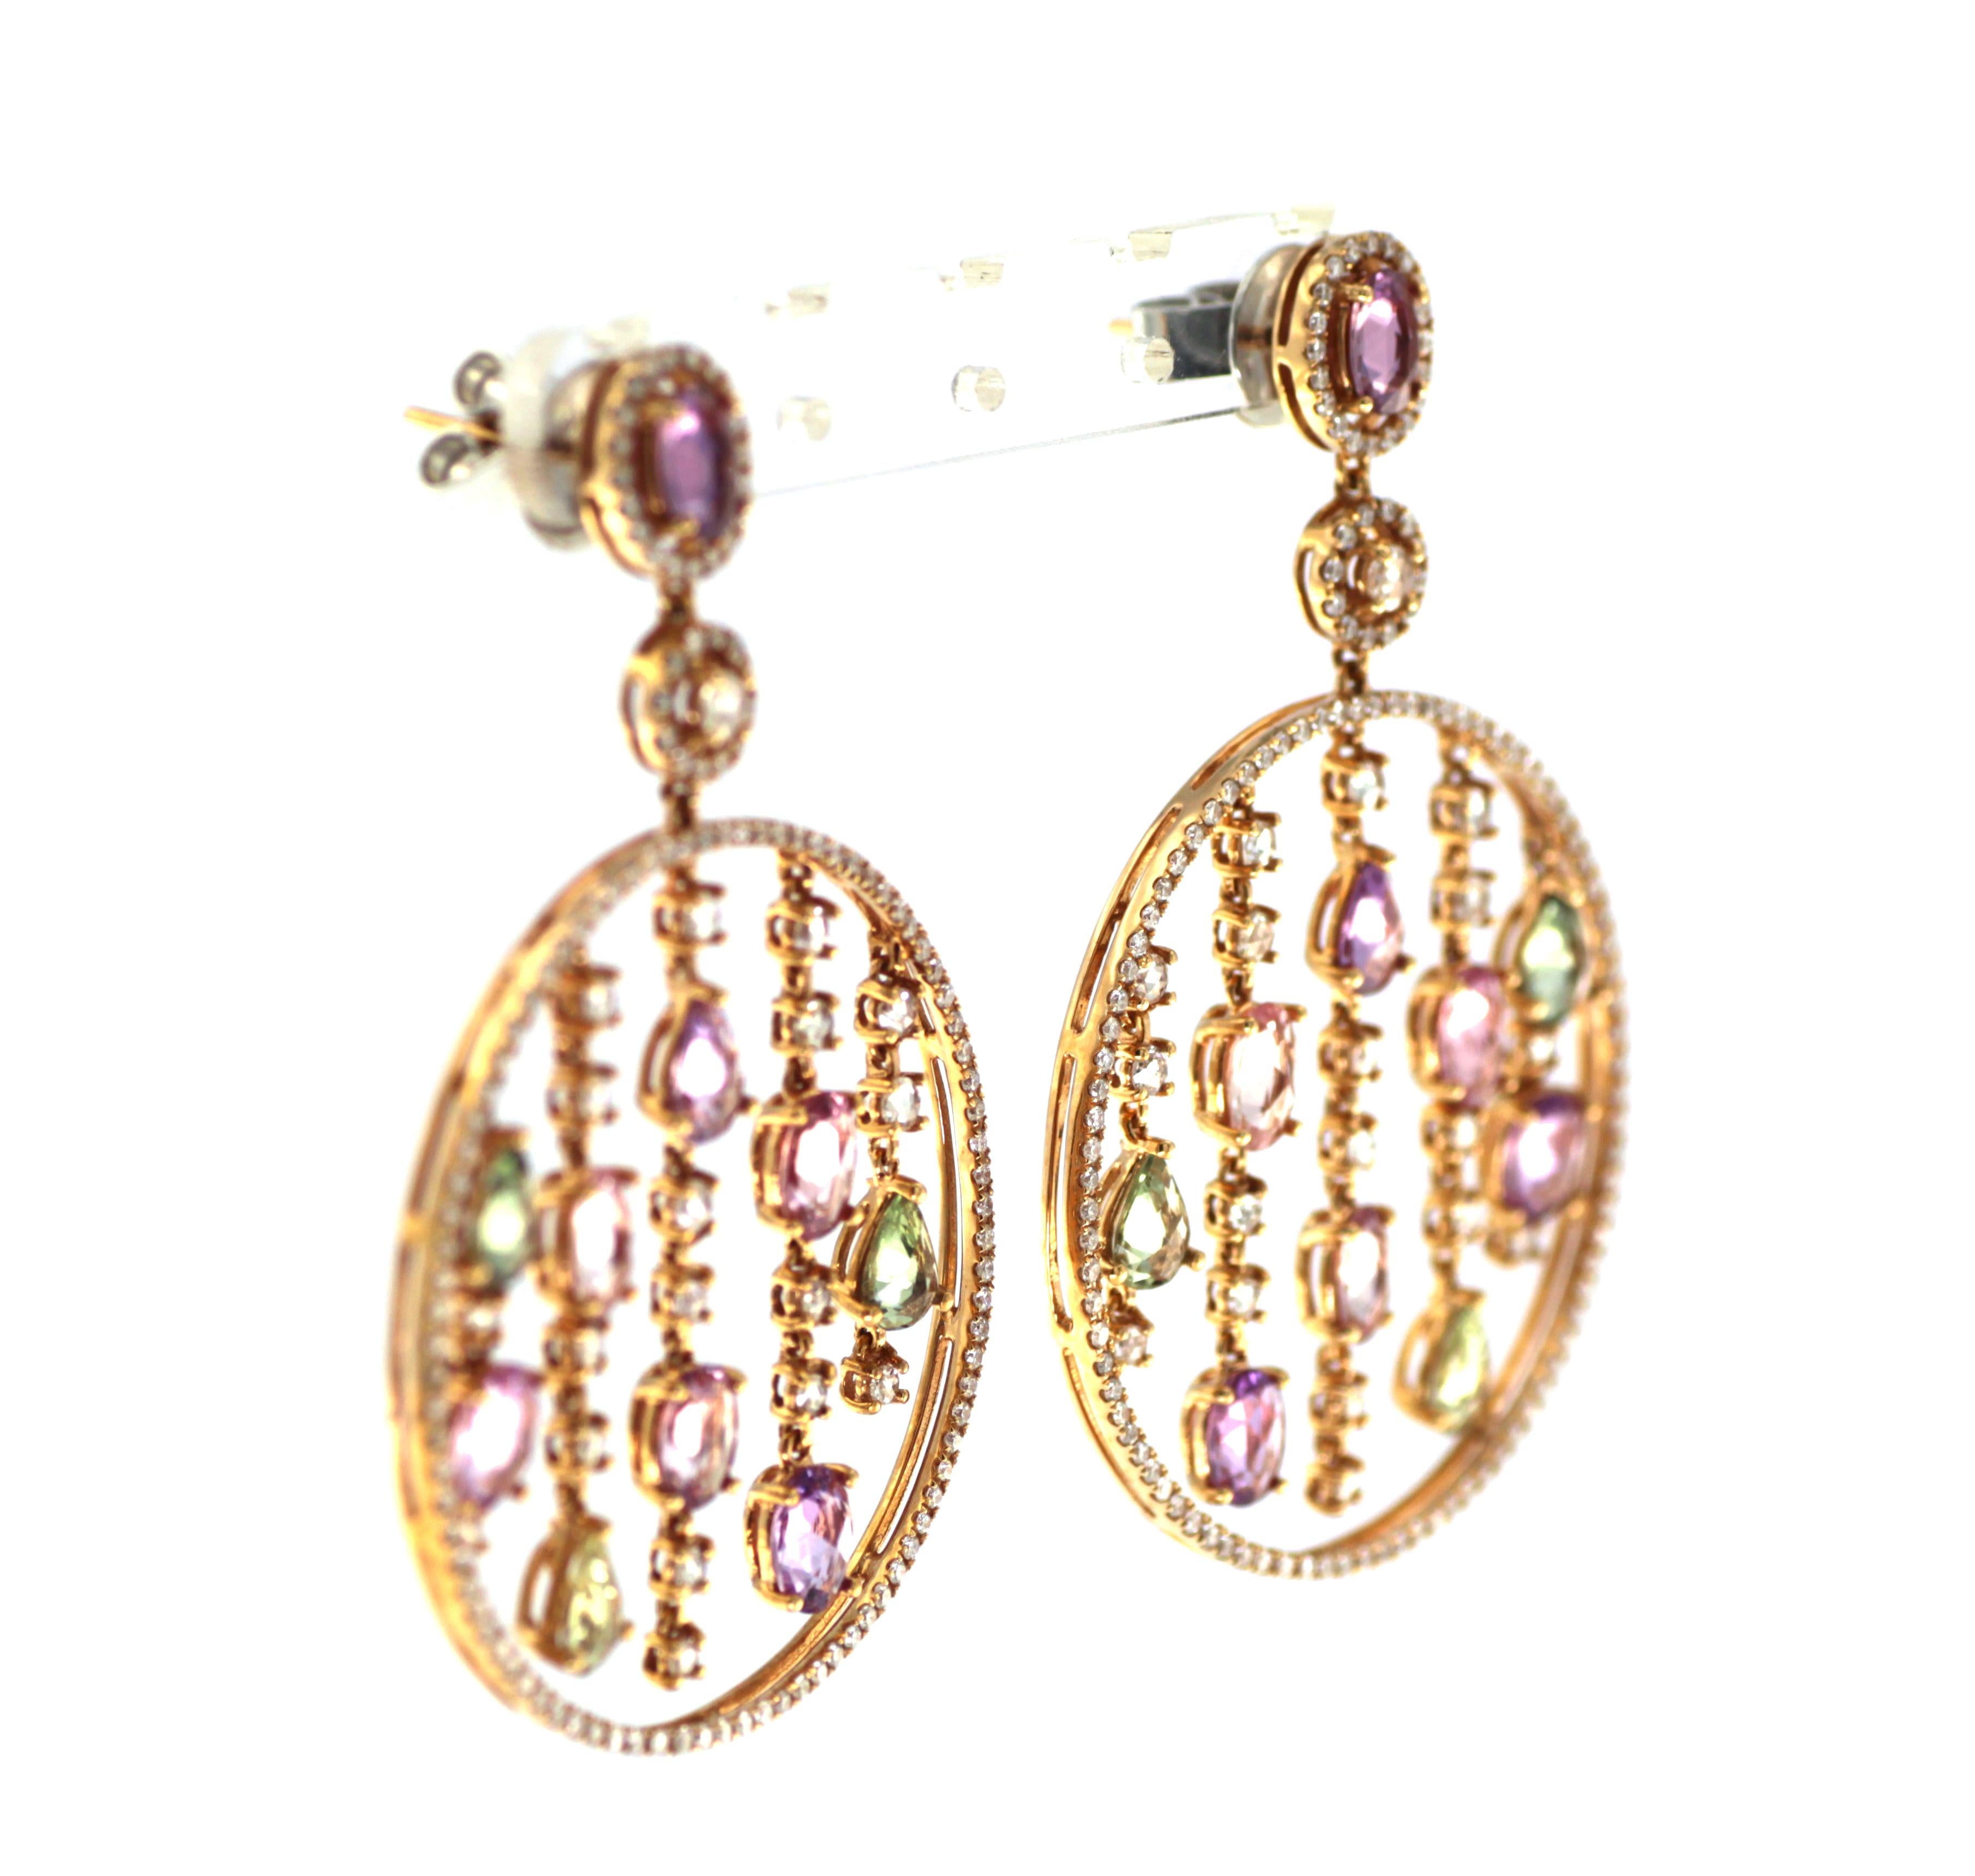 This earrings feature 9.50carats of rose cut fancy sapphire, assented with 1.38 carats of white round diamonds and 0.86carats rose cut diamonds. Earrings are set in 18 karat rose gold. 
18 Karat Rose Gold
Fancy Color Sapphire 9.50 carat
Rose Cut